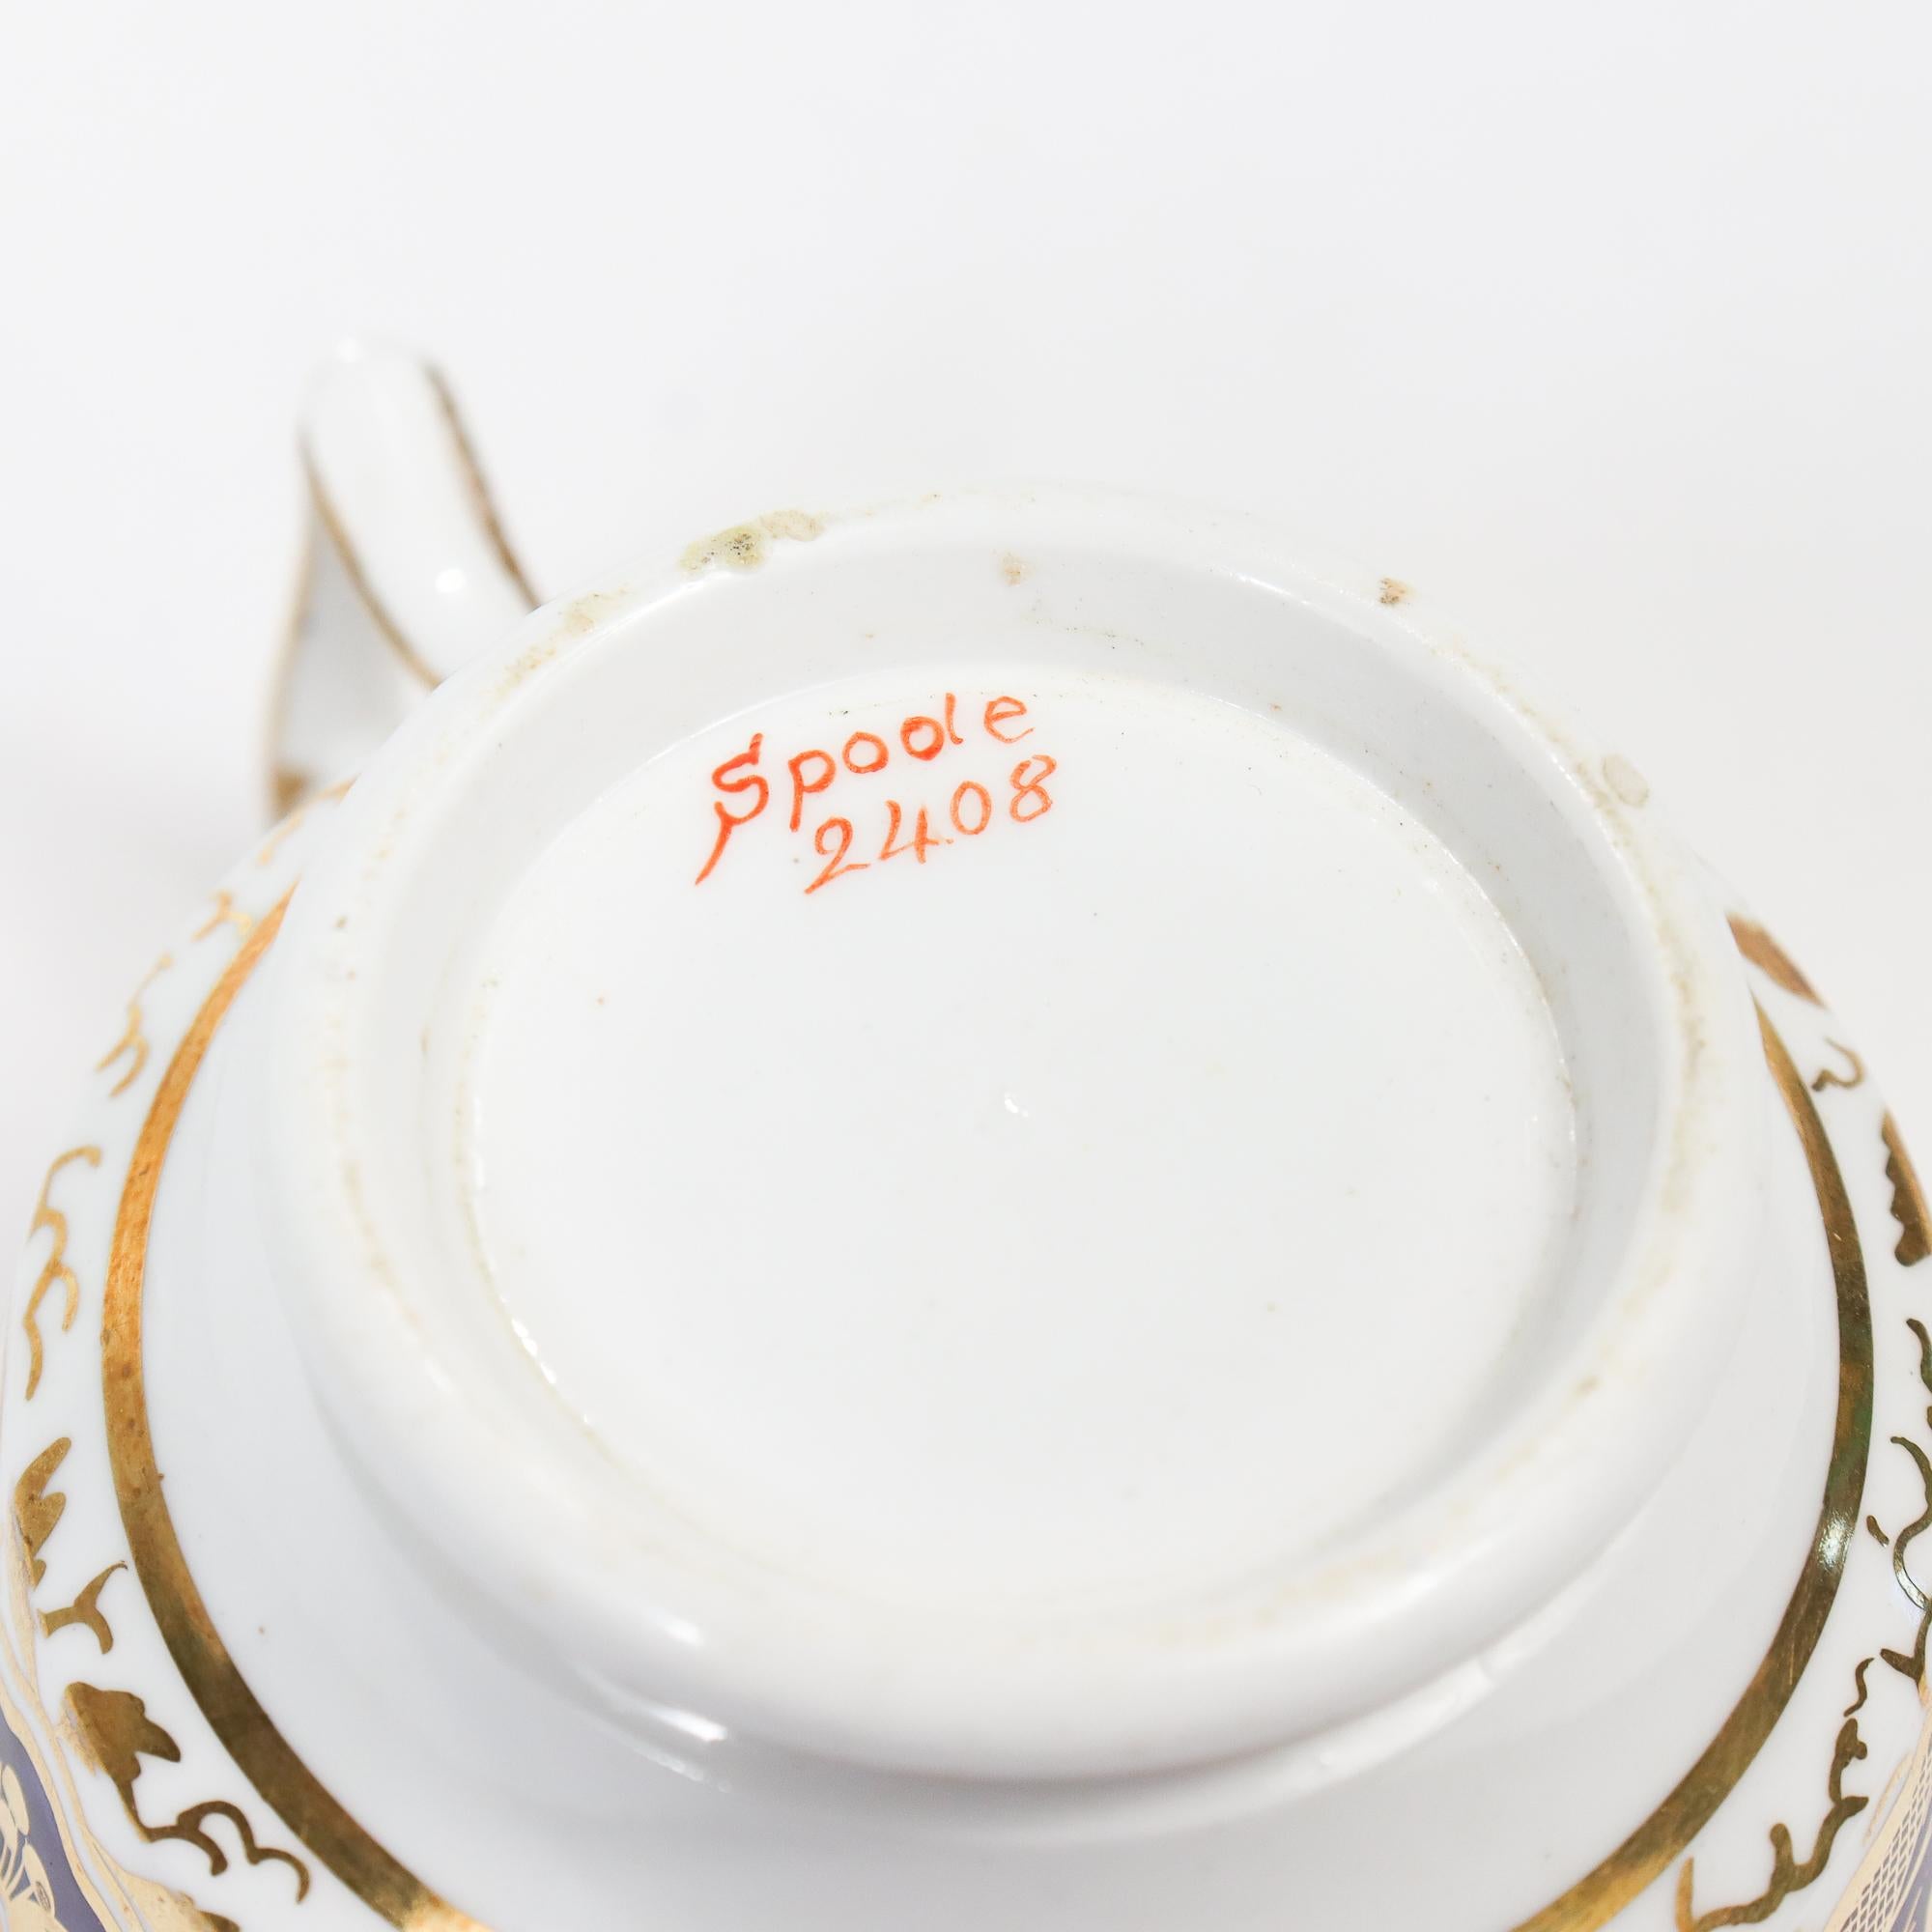 Antique Early 19th Century Spode Porcelain Pattern Number 2408 Tea Cup & Saucer For Sale 3